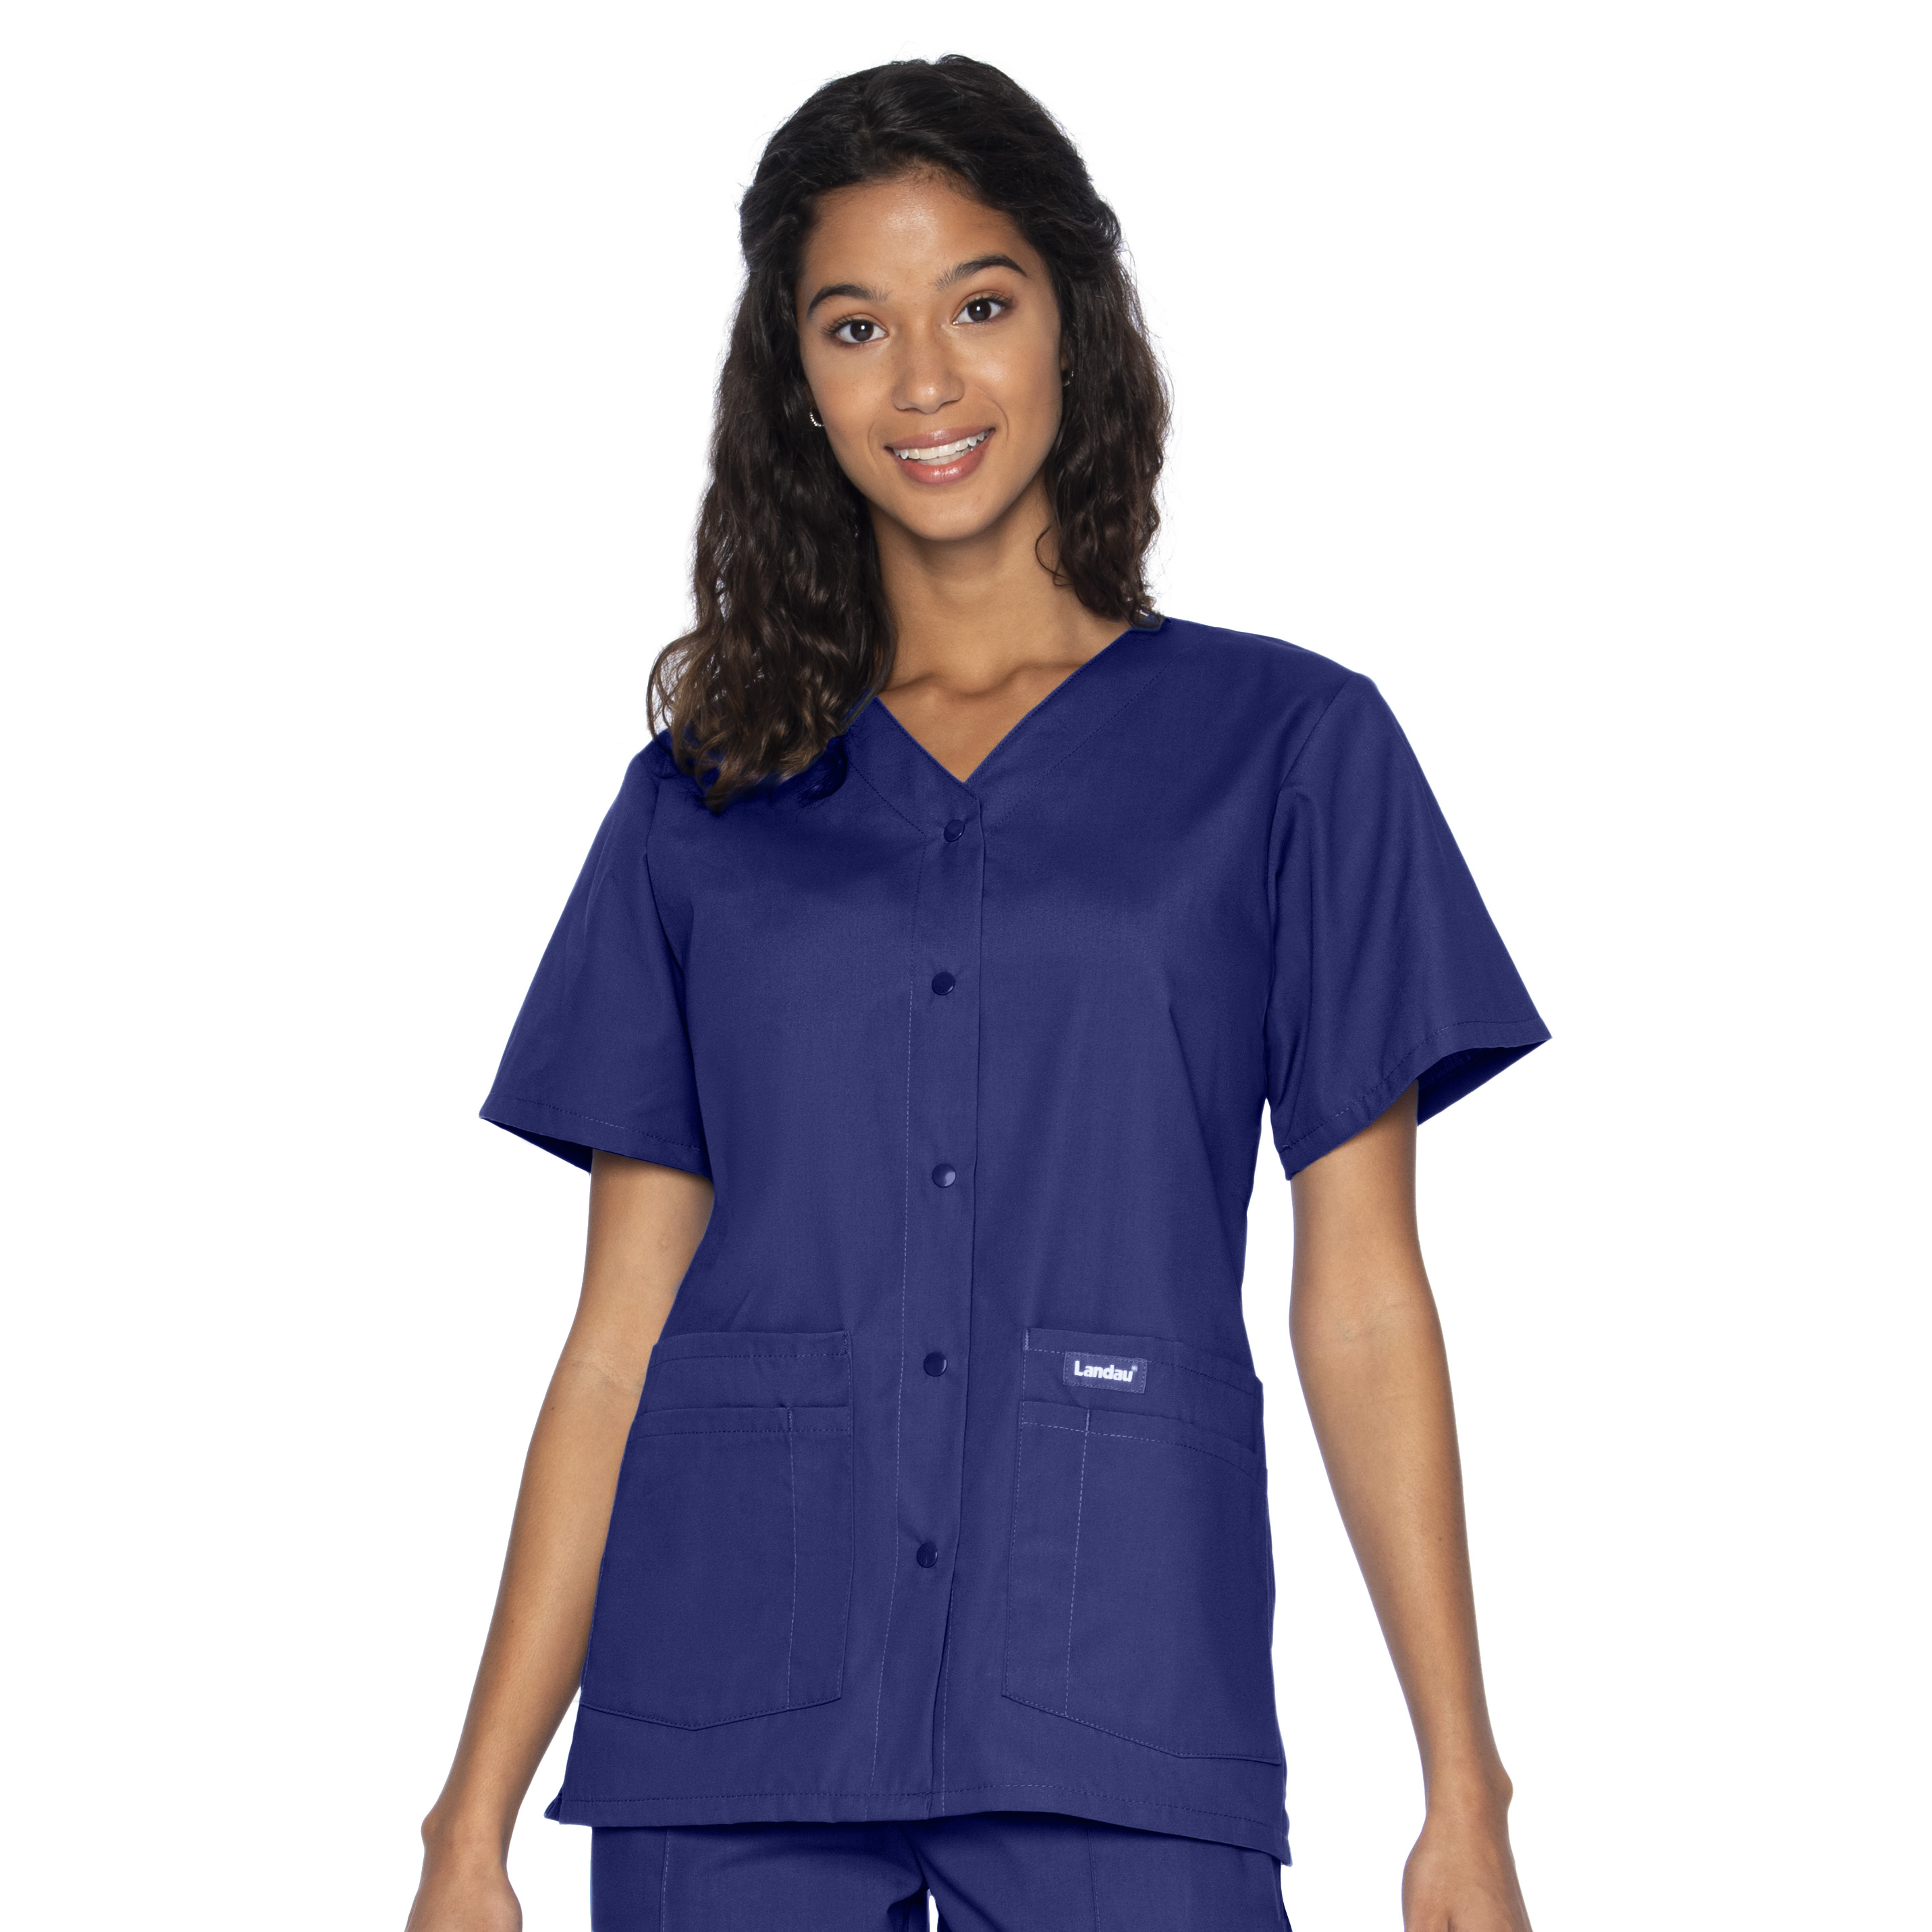 What features does a Landau button front scrub top have?